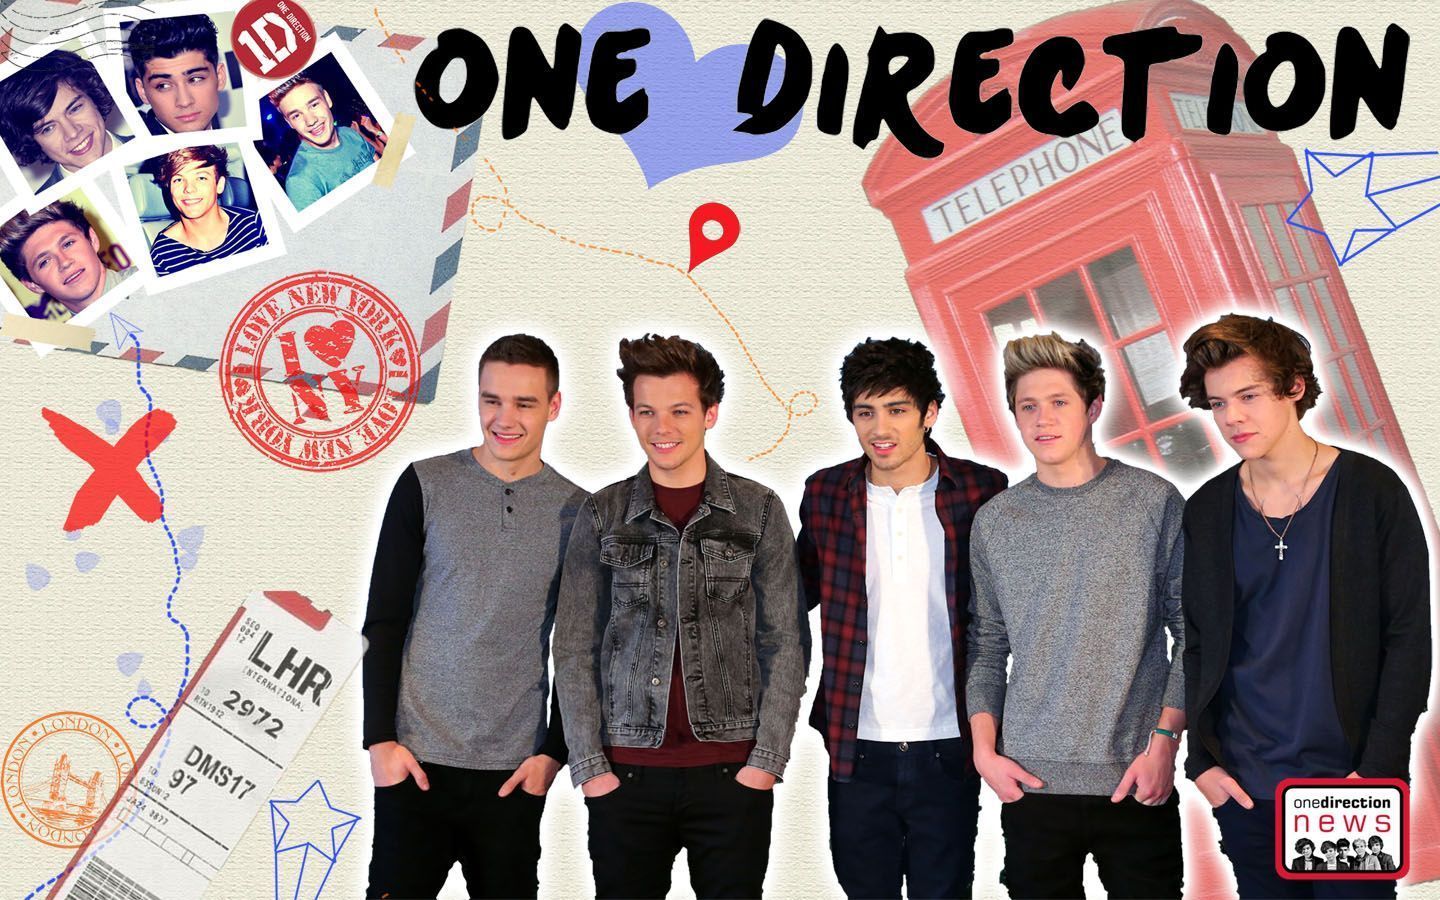 1440x900 Oglum On One Direction In 2022 One Direction Background One Direction One Direction 2014